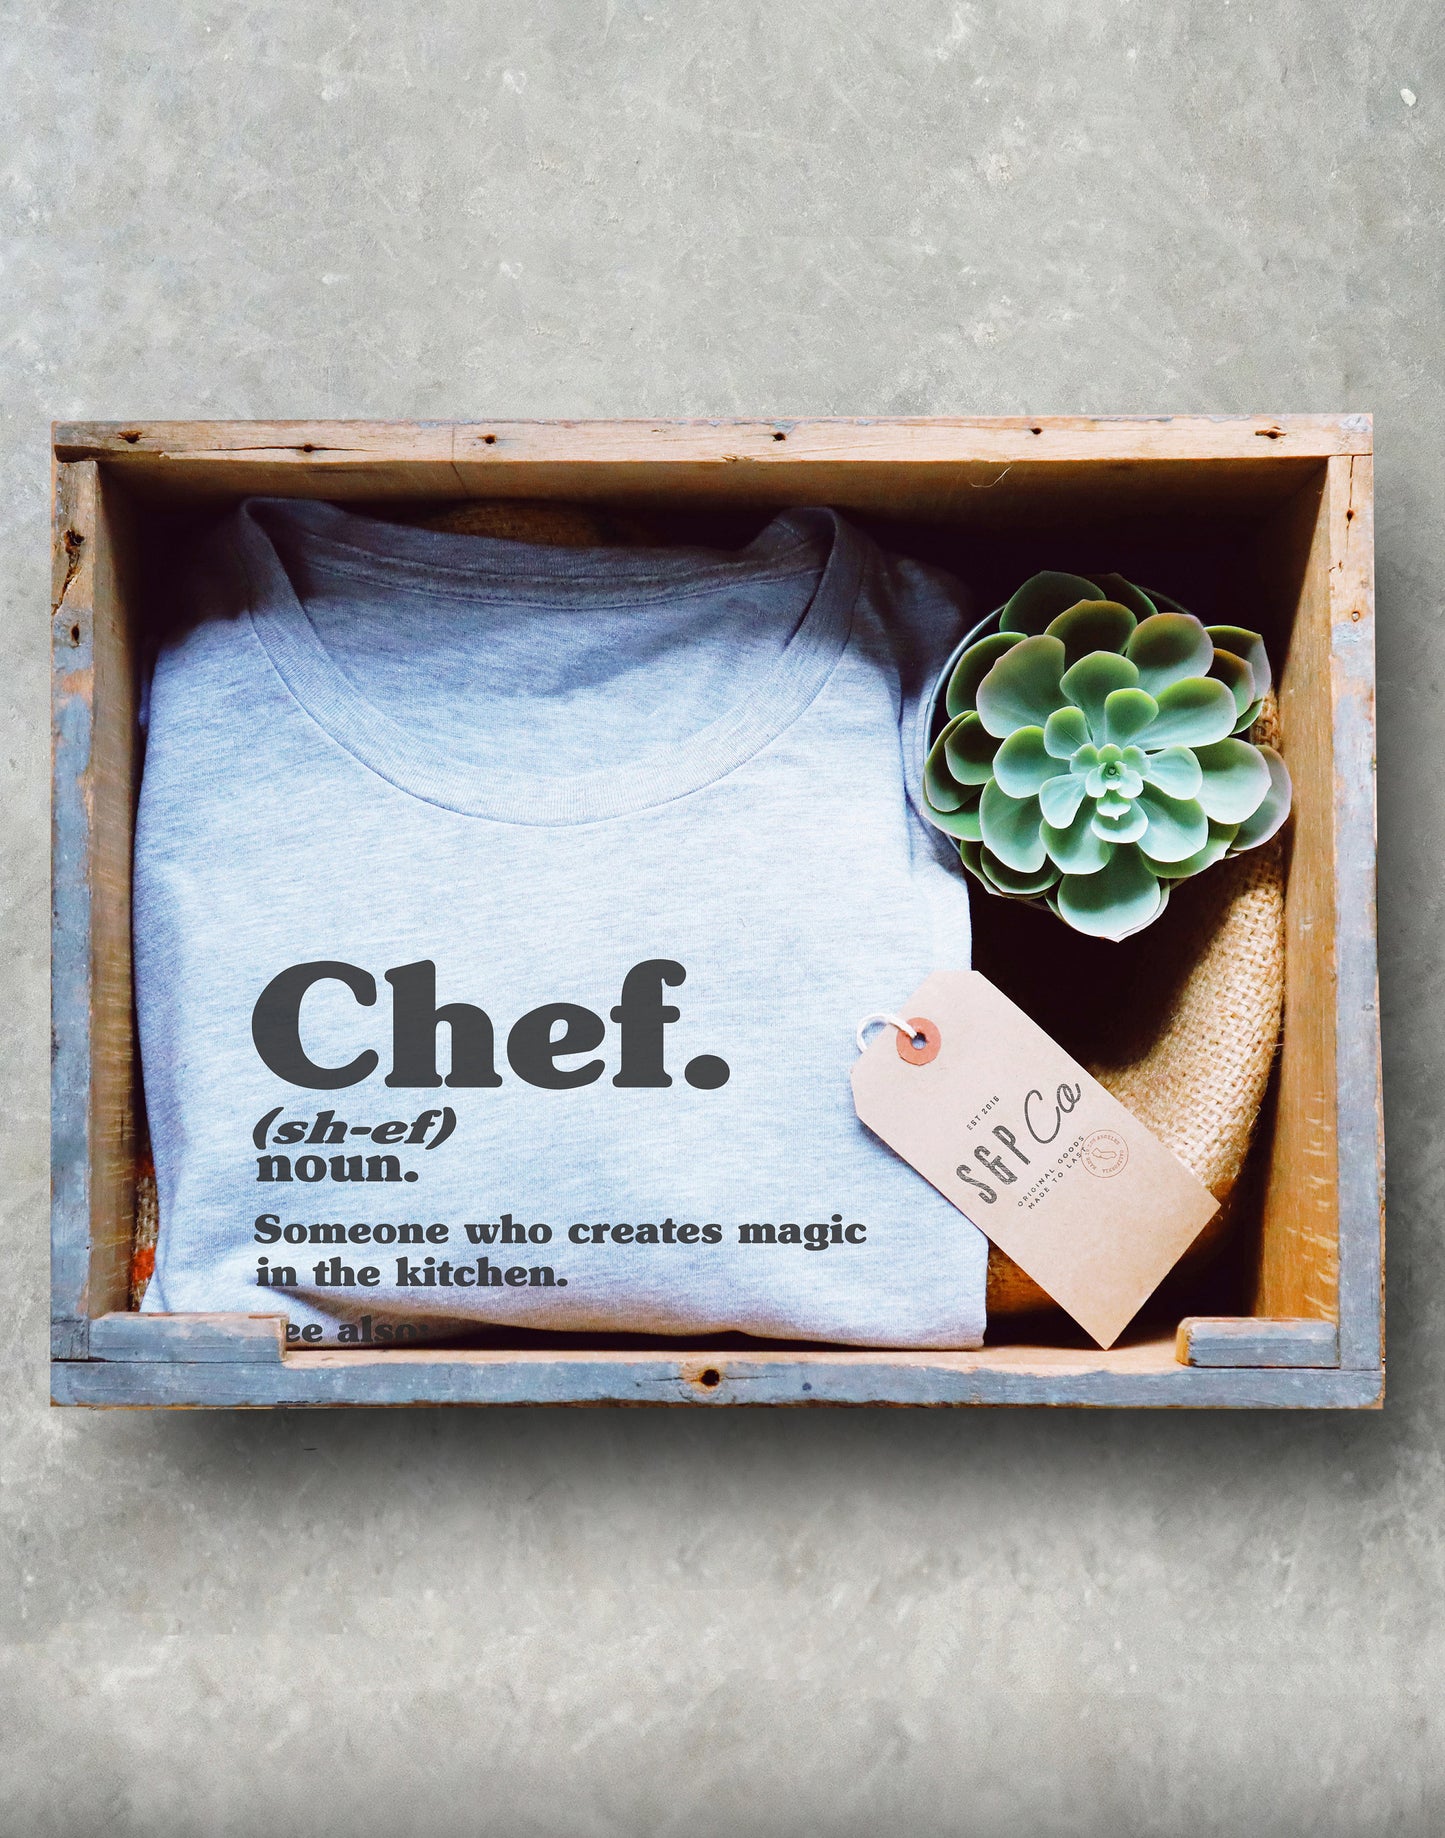 Chef Definition Unisex Shirt - Chef shirt, Chef gift, Cooking shirt, Foodie shirt, Cooking gift, Culinary gifts, Food shirt, Sous chef